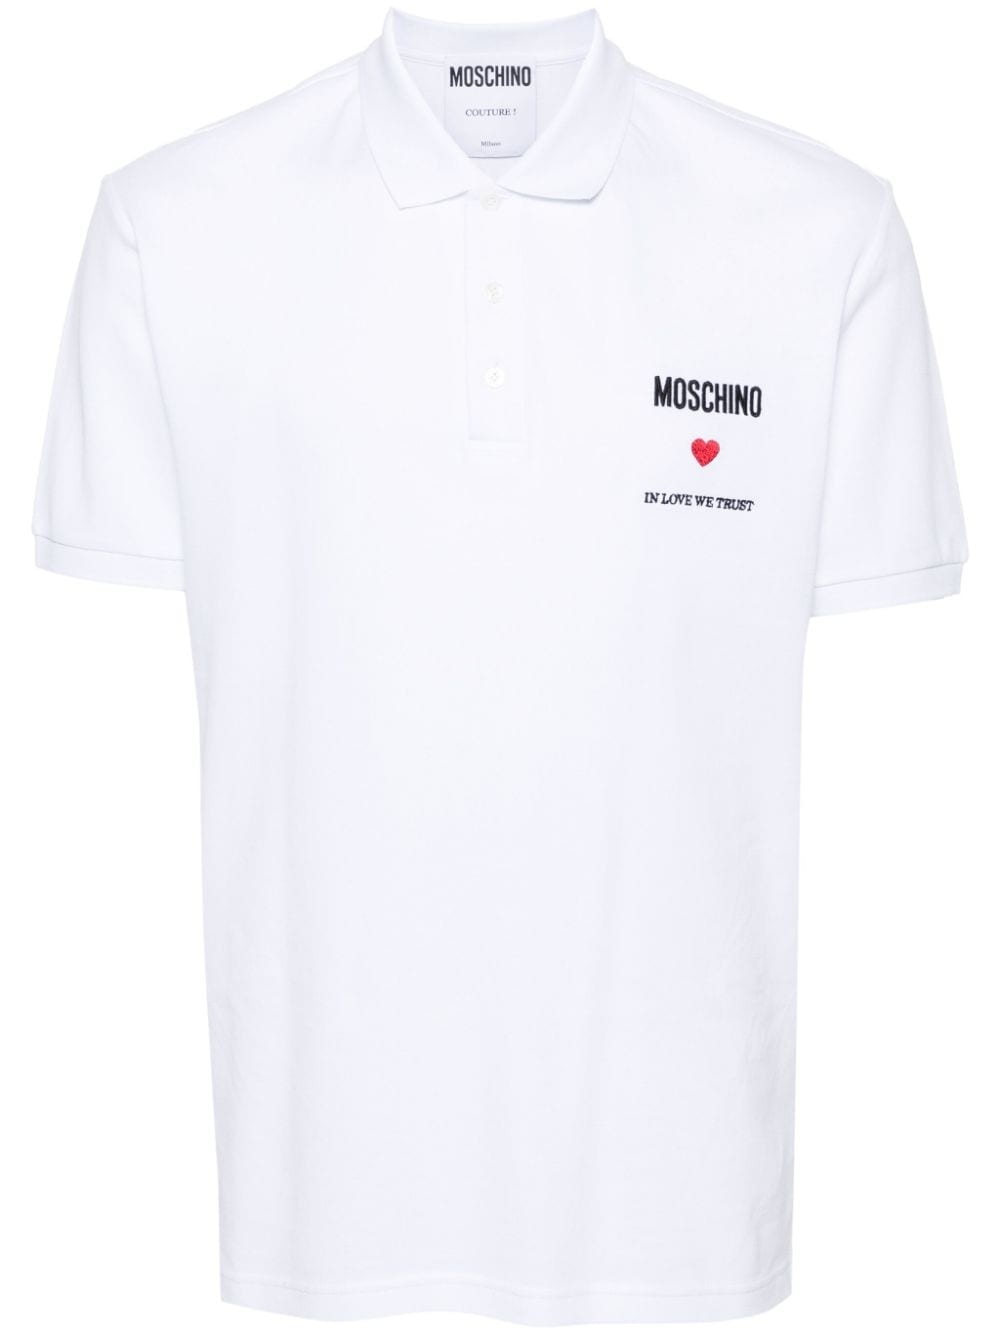 embroidered-quote polo shirt - 1